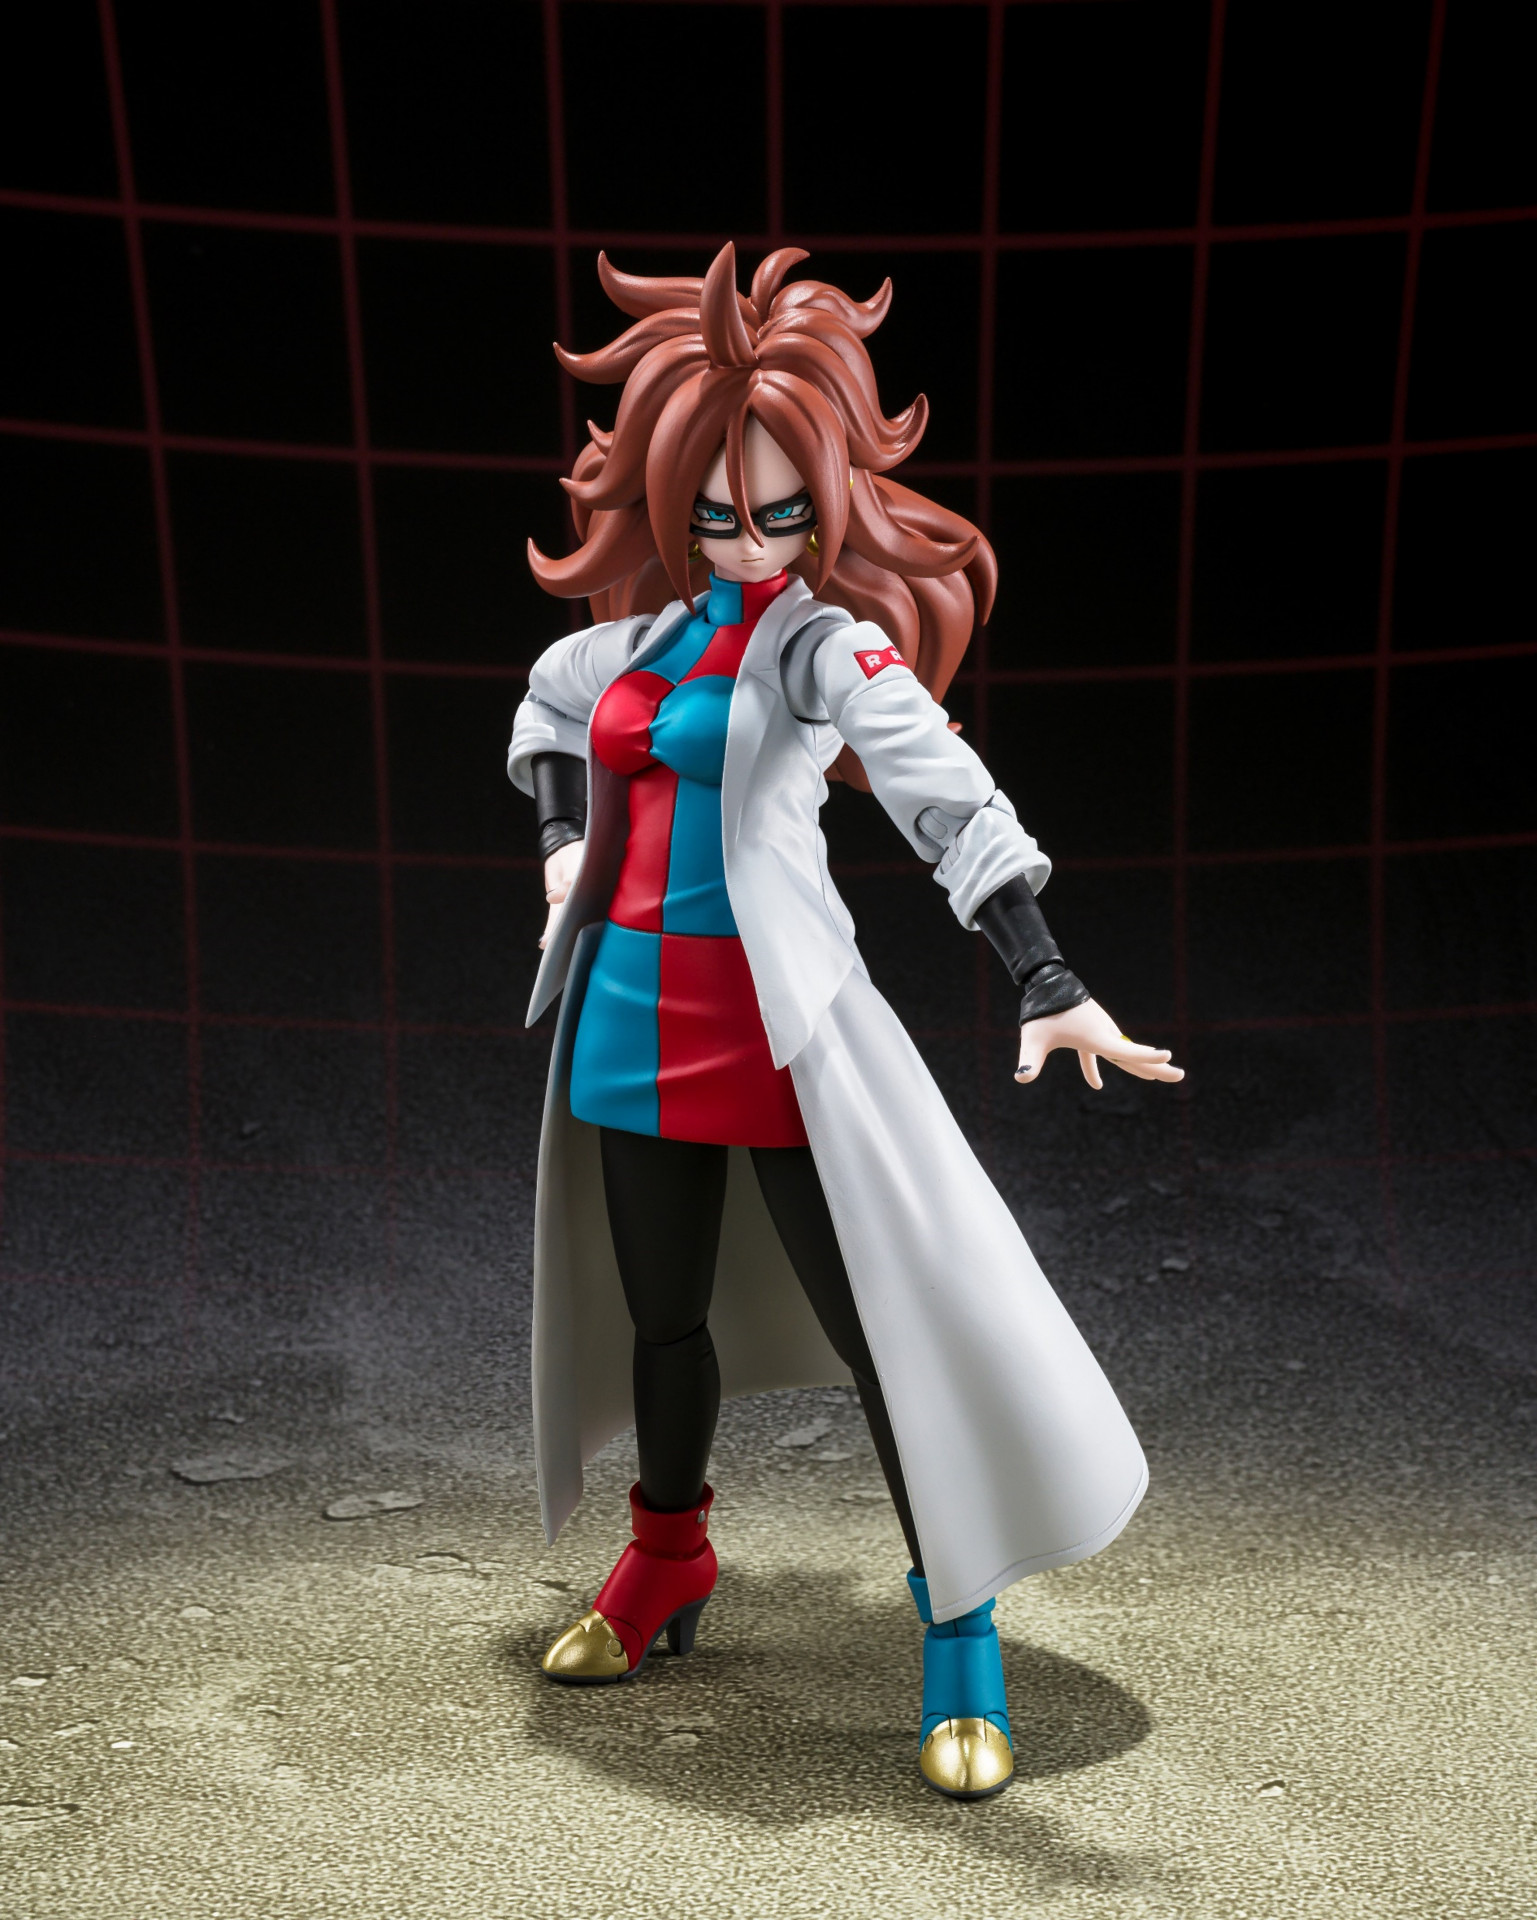 Android 21 (Lab Coat) Coming Soon to S.H.Figuarts!